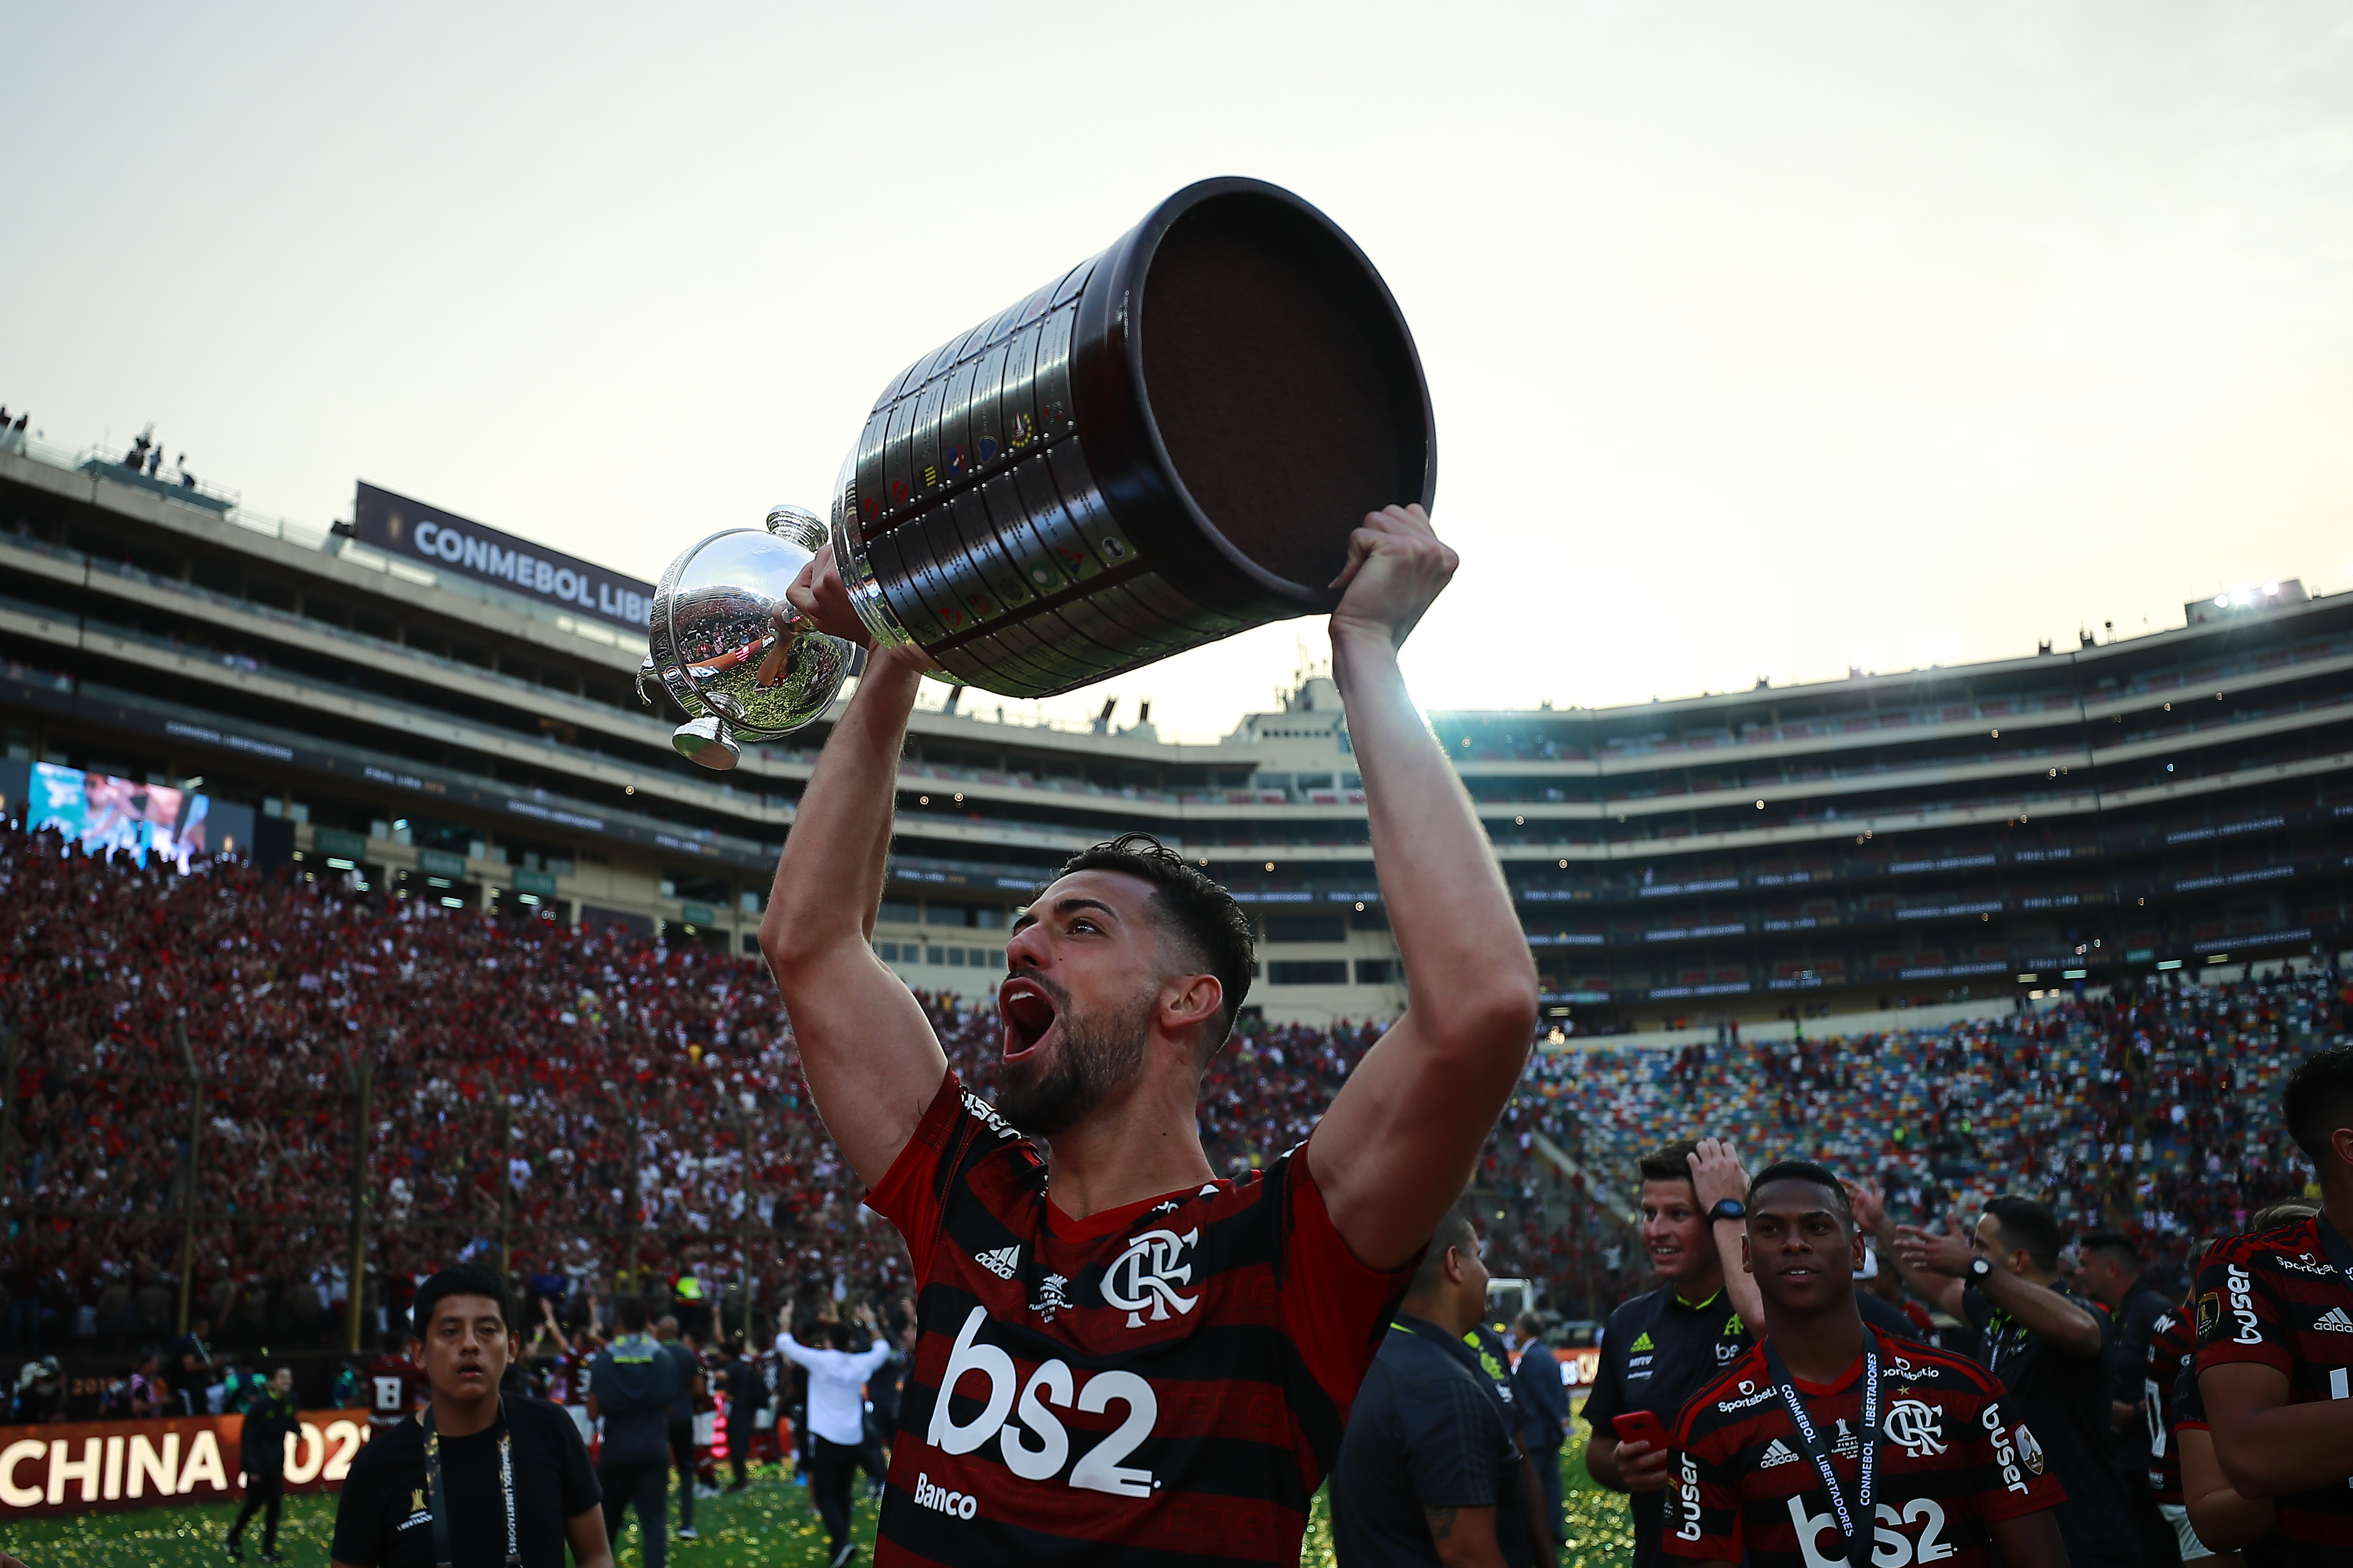 LIMA, PERU - NOVEMBER 23: Pablo Mari of Flamengo lifts the trophy after winning during the final match of Copa CONMEBOL Libertadores 2019 between Flamengo and River Plate at Estadio Monumental on November 23, 2019 in Lima, Peru. (Photo by Daniel Apuy/Getty Images)